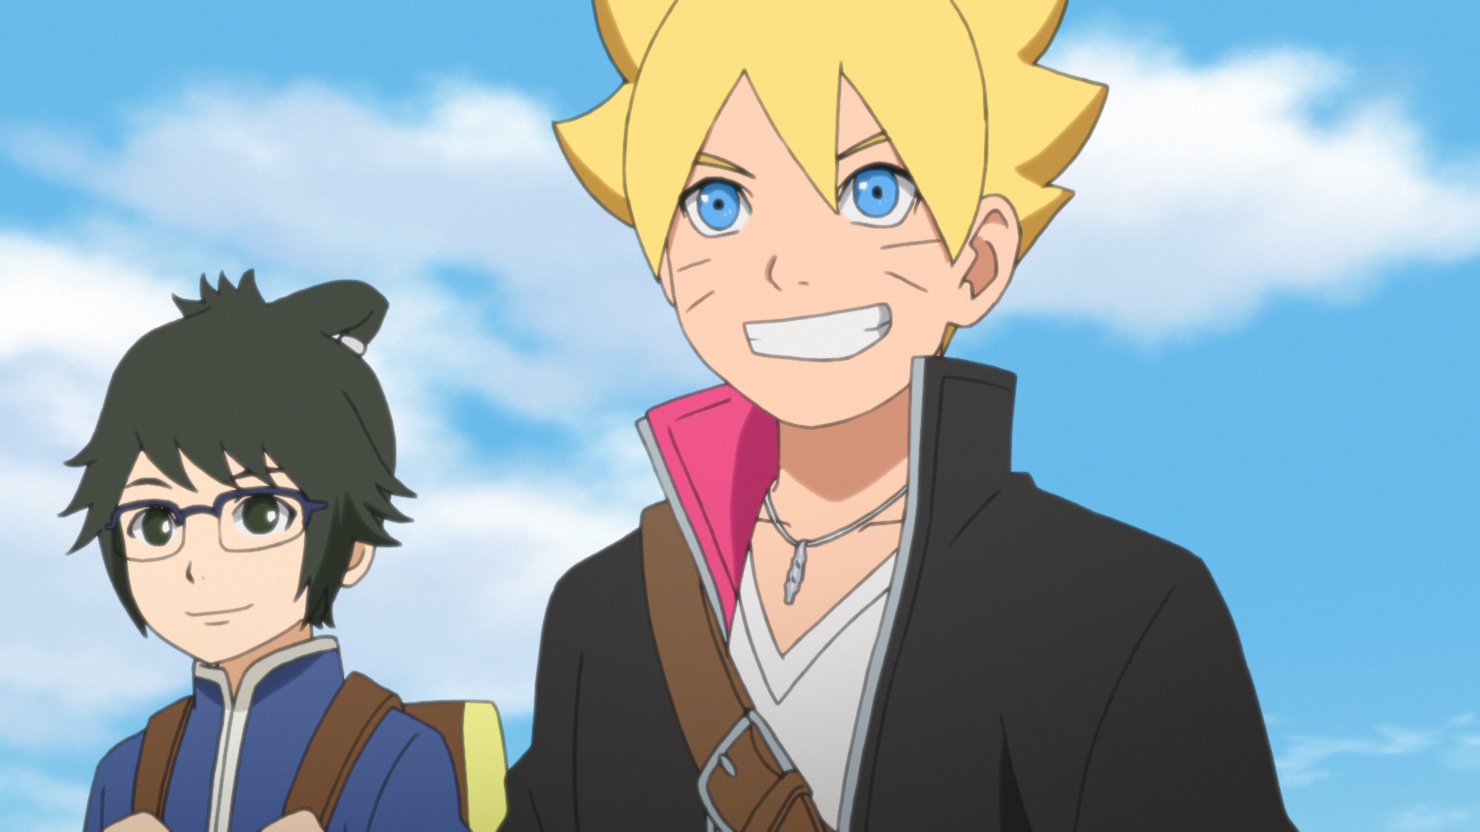 Boruto Dubbed Episodes: When Will We Have New Episodes Dubbed In English.